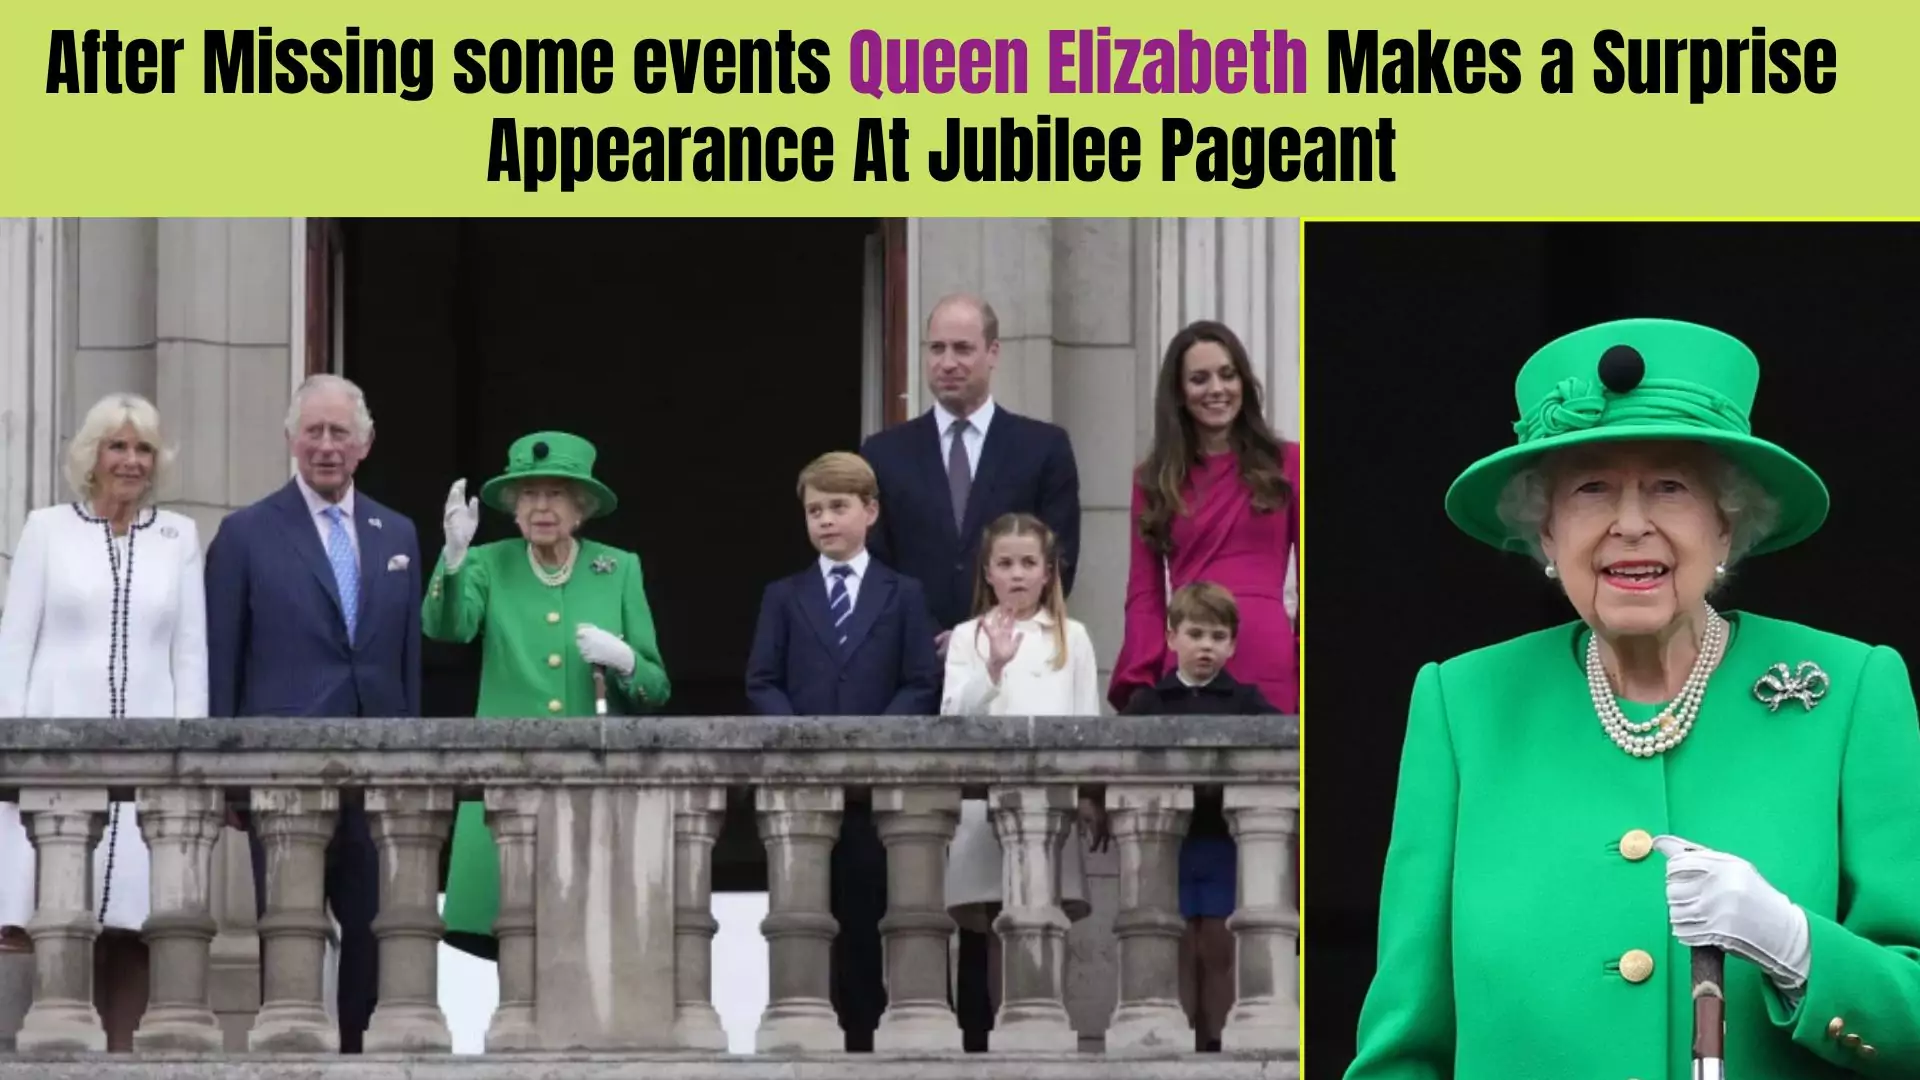 After Missing some events Queen Elizabeth Makes a Surprise Appearance At Jubilee Pageant